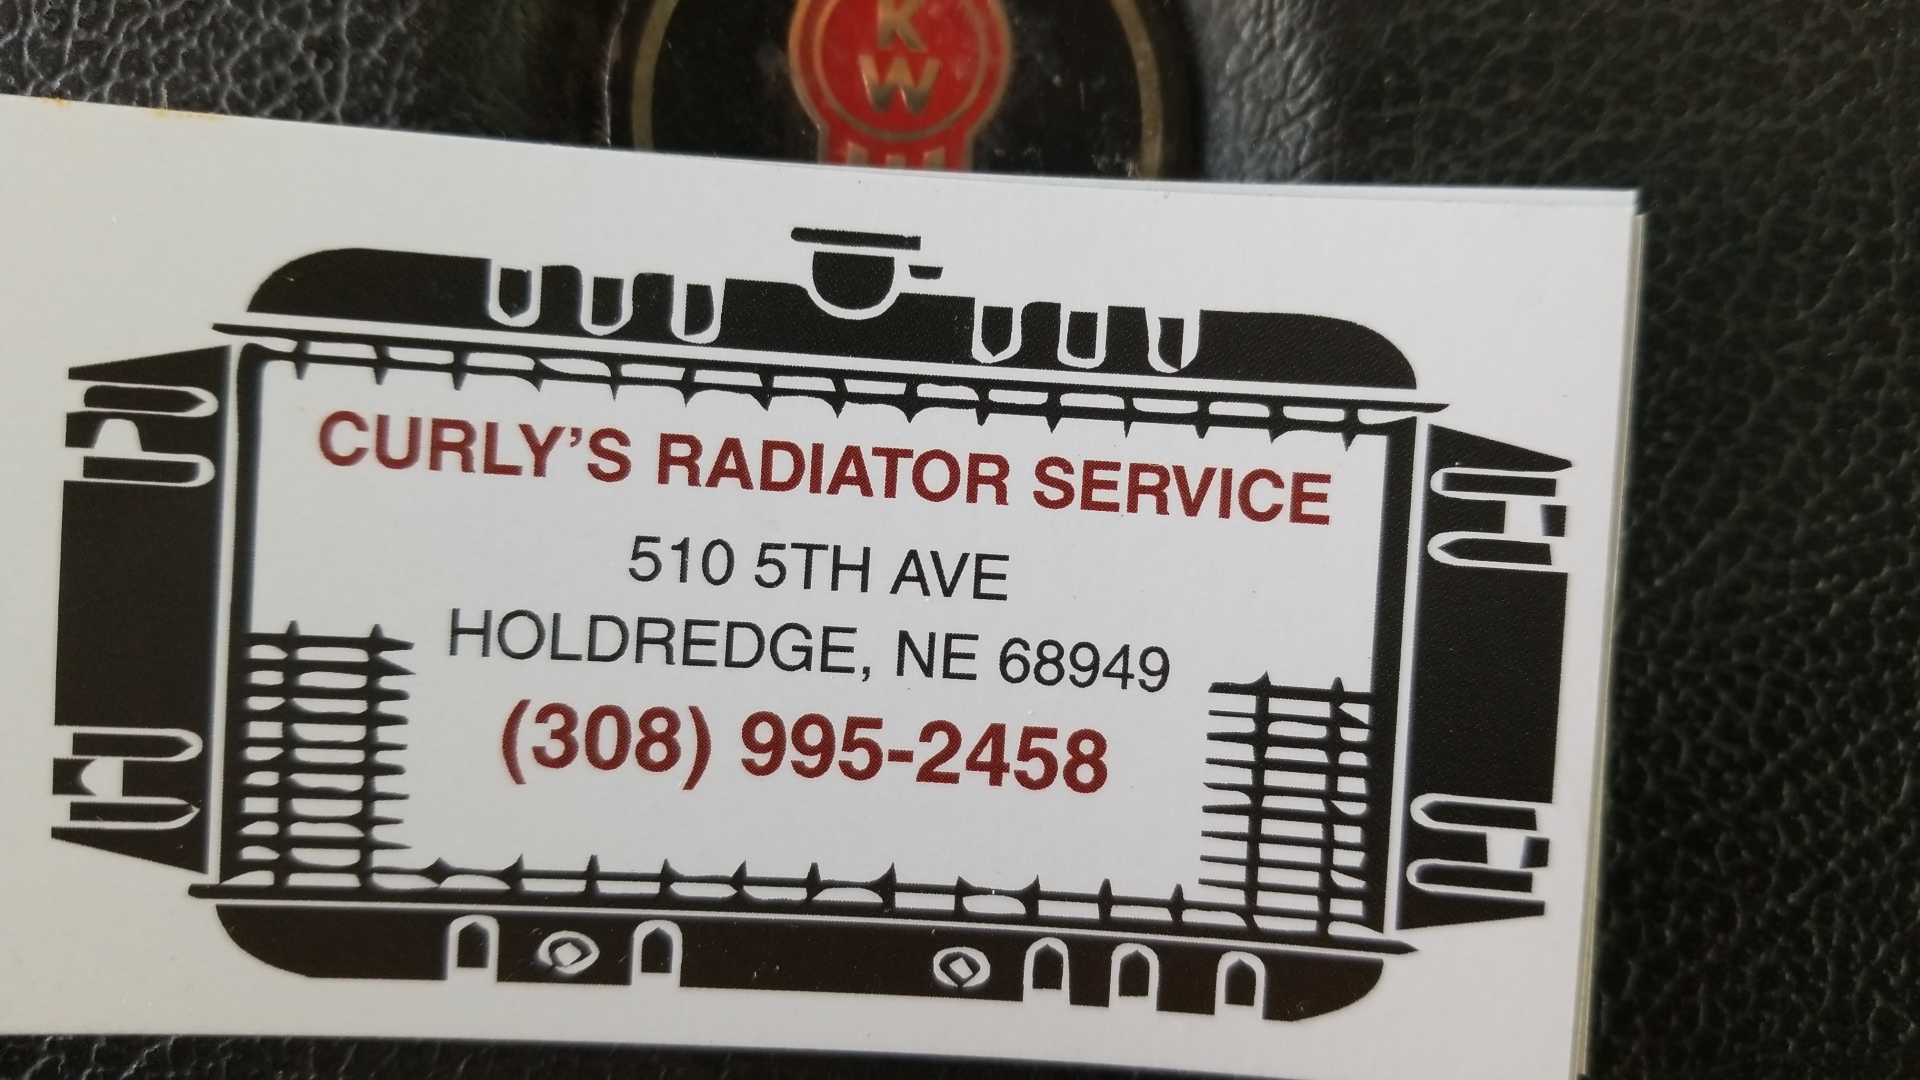 Curly's Radiator Services